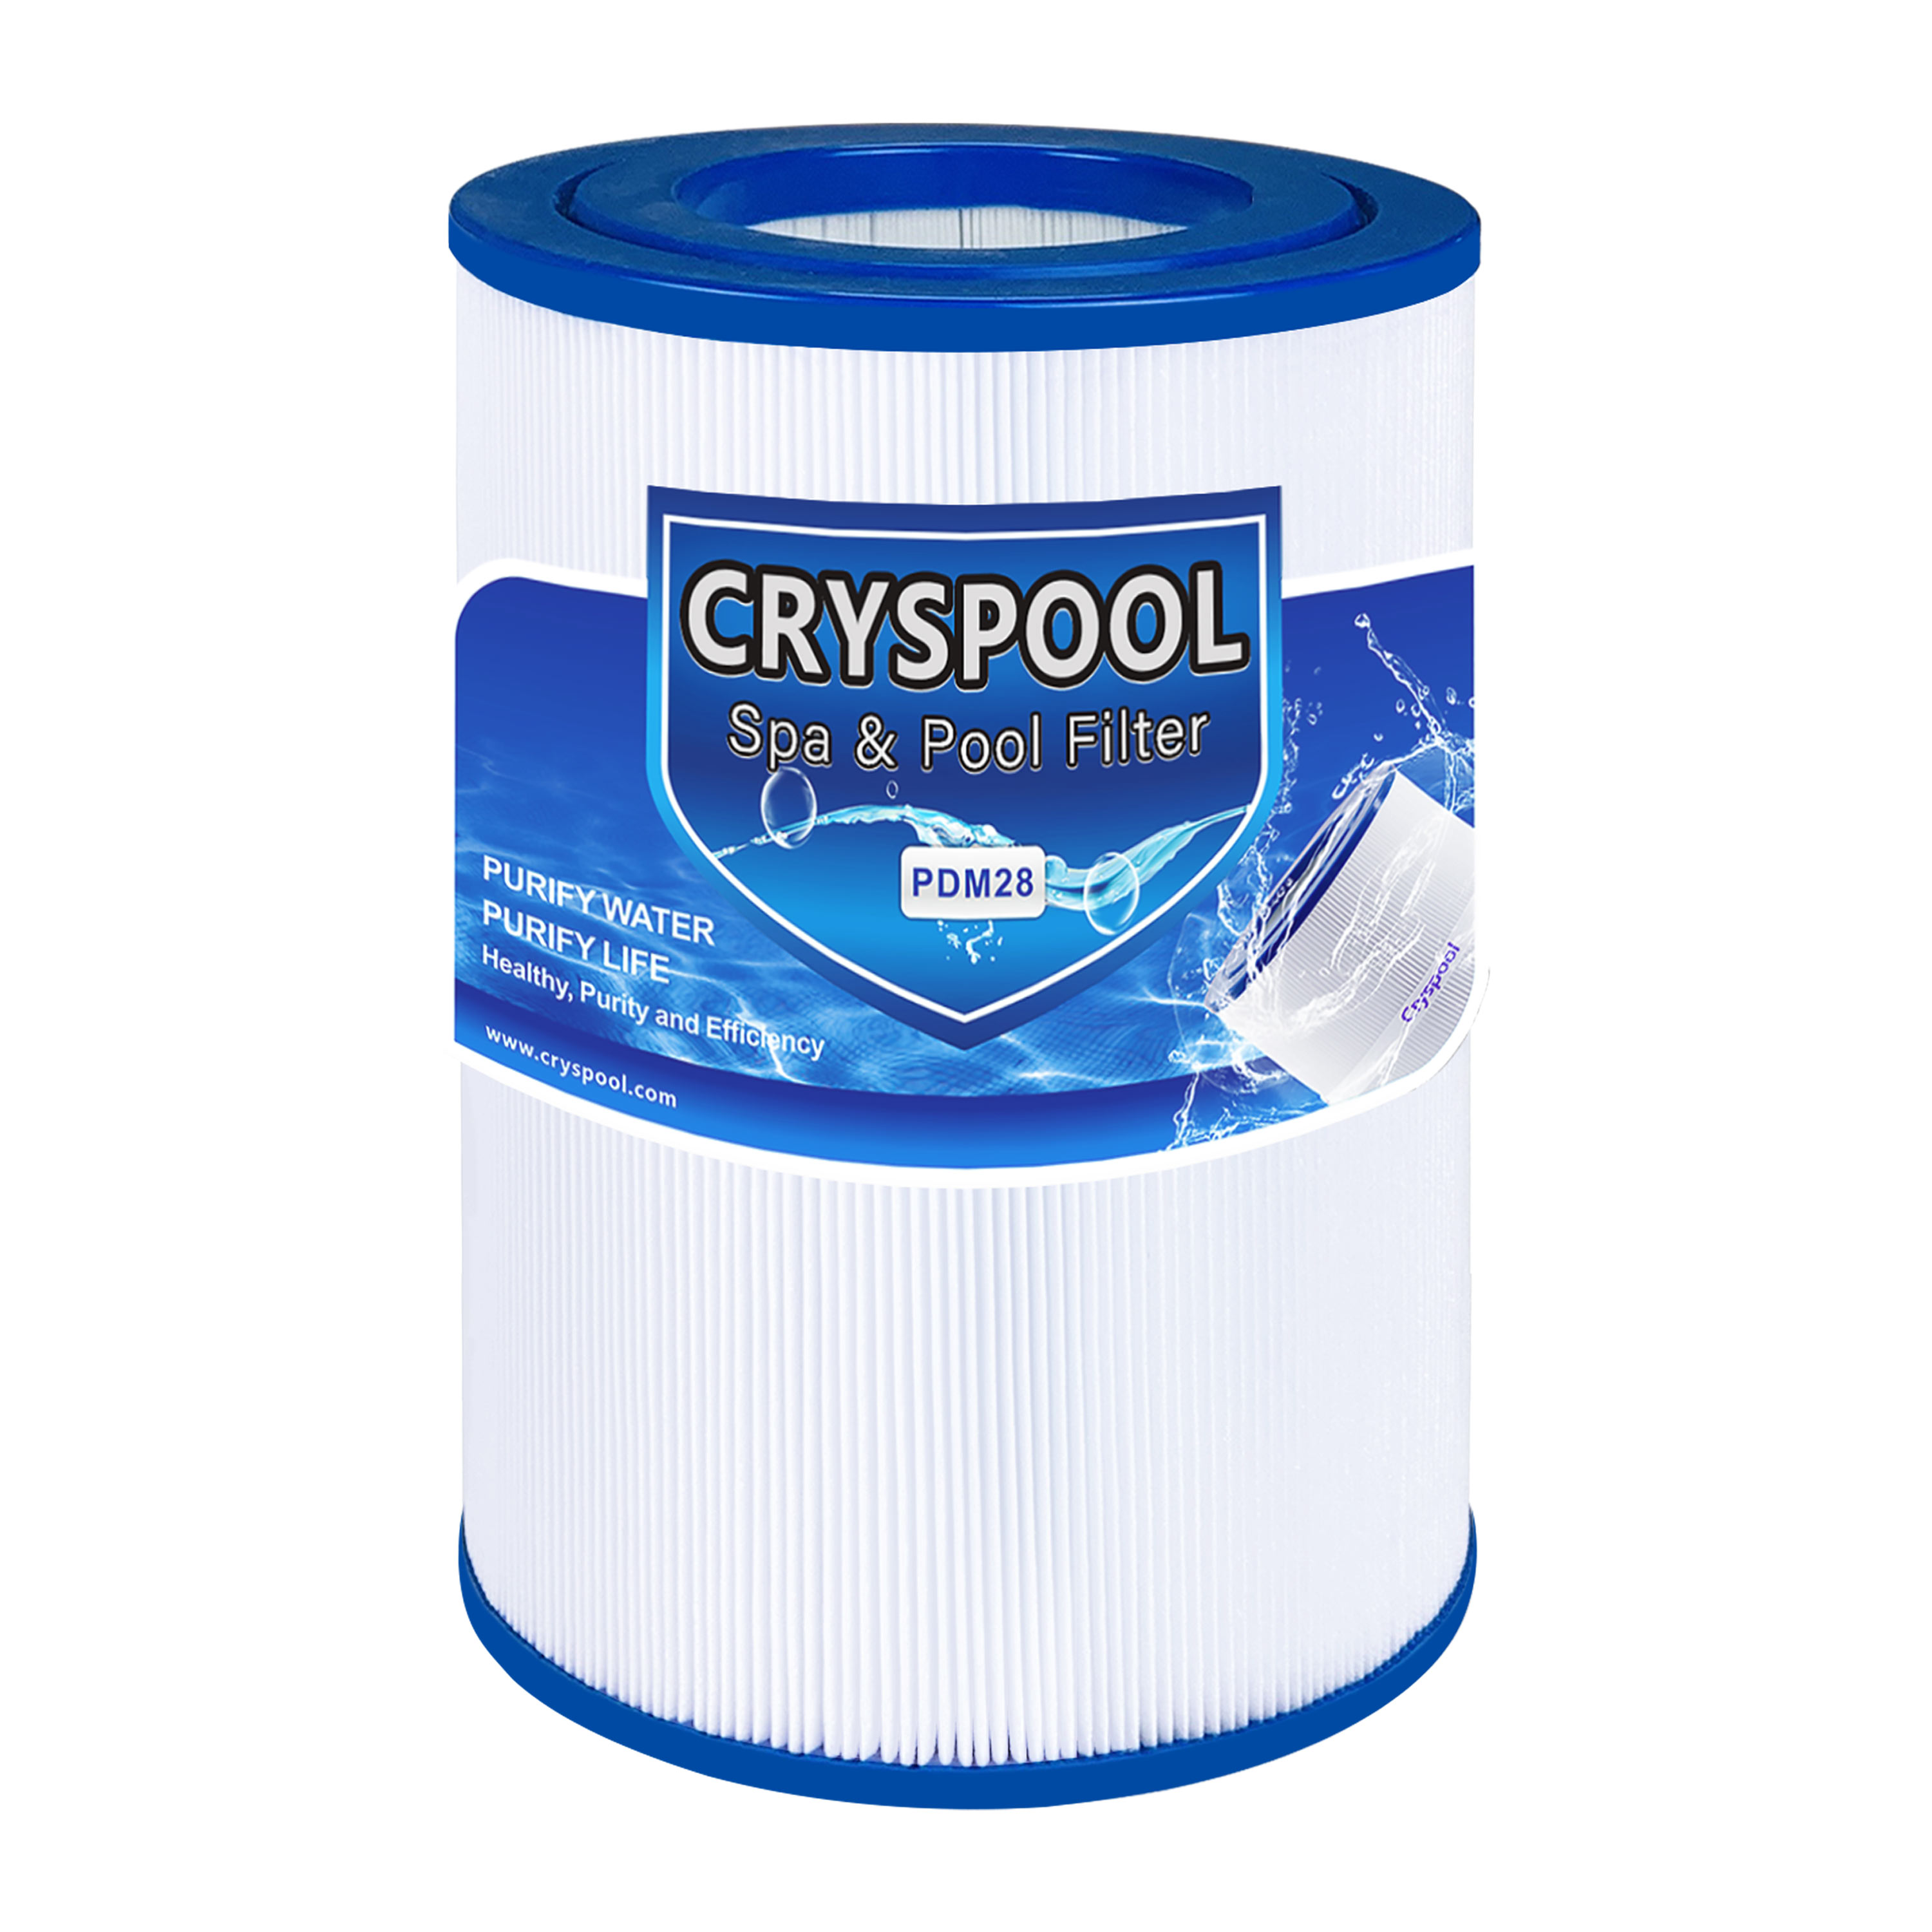 PriceList for Hot Springs Filter Replacement - Cryspool Hot Tub Filter(not Oval) Replacement for Spa Filter Aqua Crest PDM28 461273, Dream Maker – Cryspool